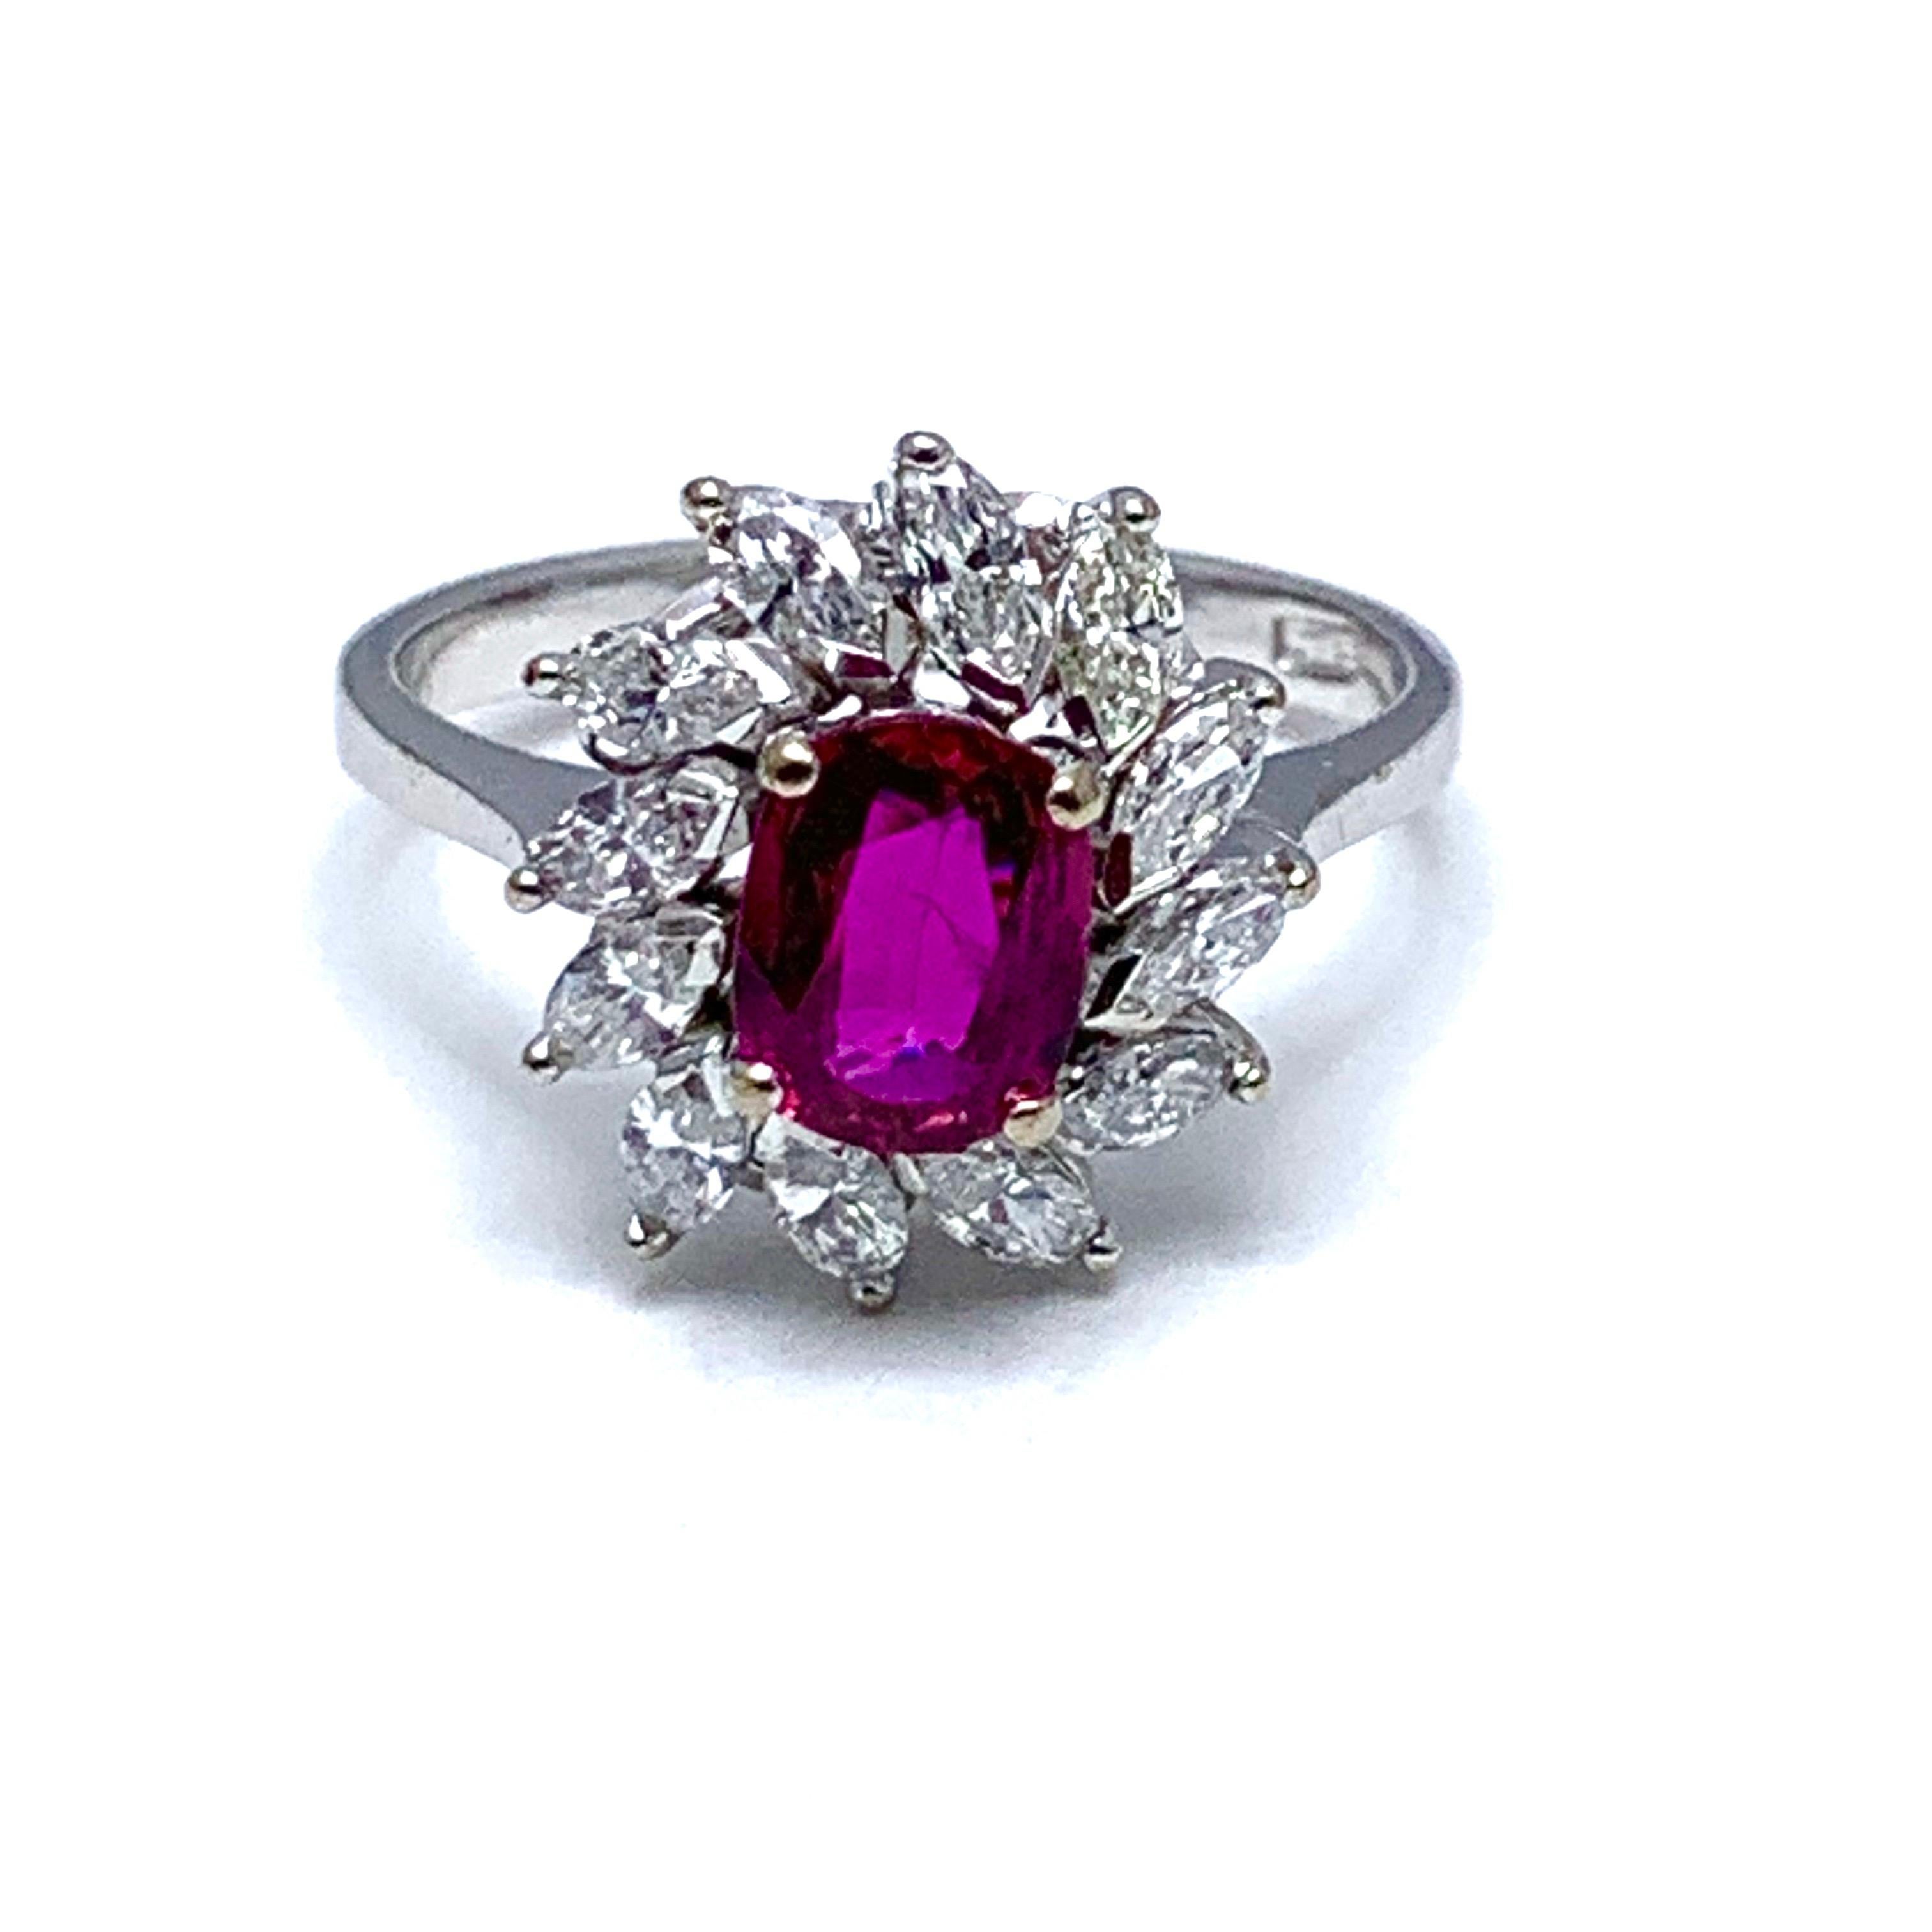 A vibrant currant red 1.00 carat Ruby and marquise Diamond engagement/cocktail ring in 14 karat white gold.  The Ruby is uniquely set slightly off center in conjunction with the slant set marquise Diamonds.  The 12 Diamonds have a total carat weight